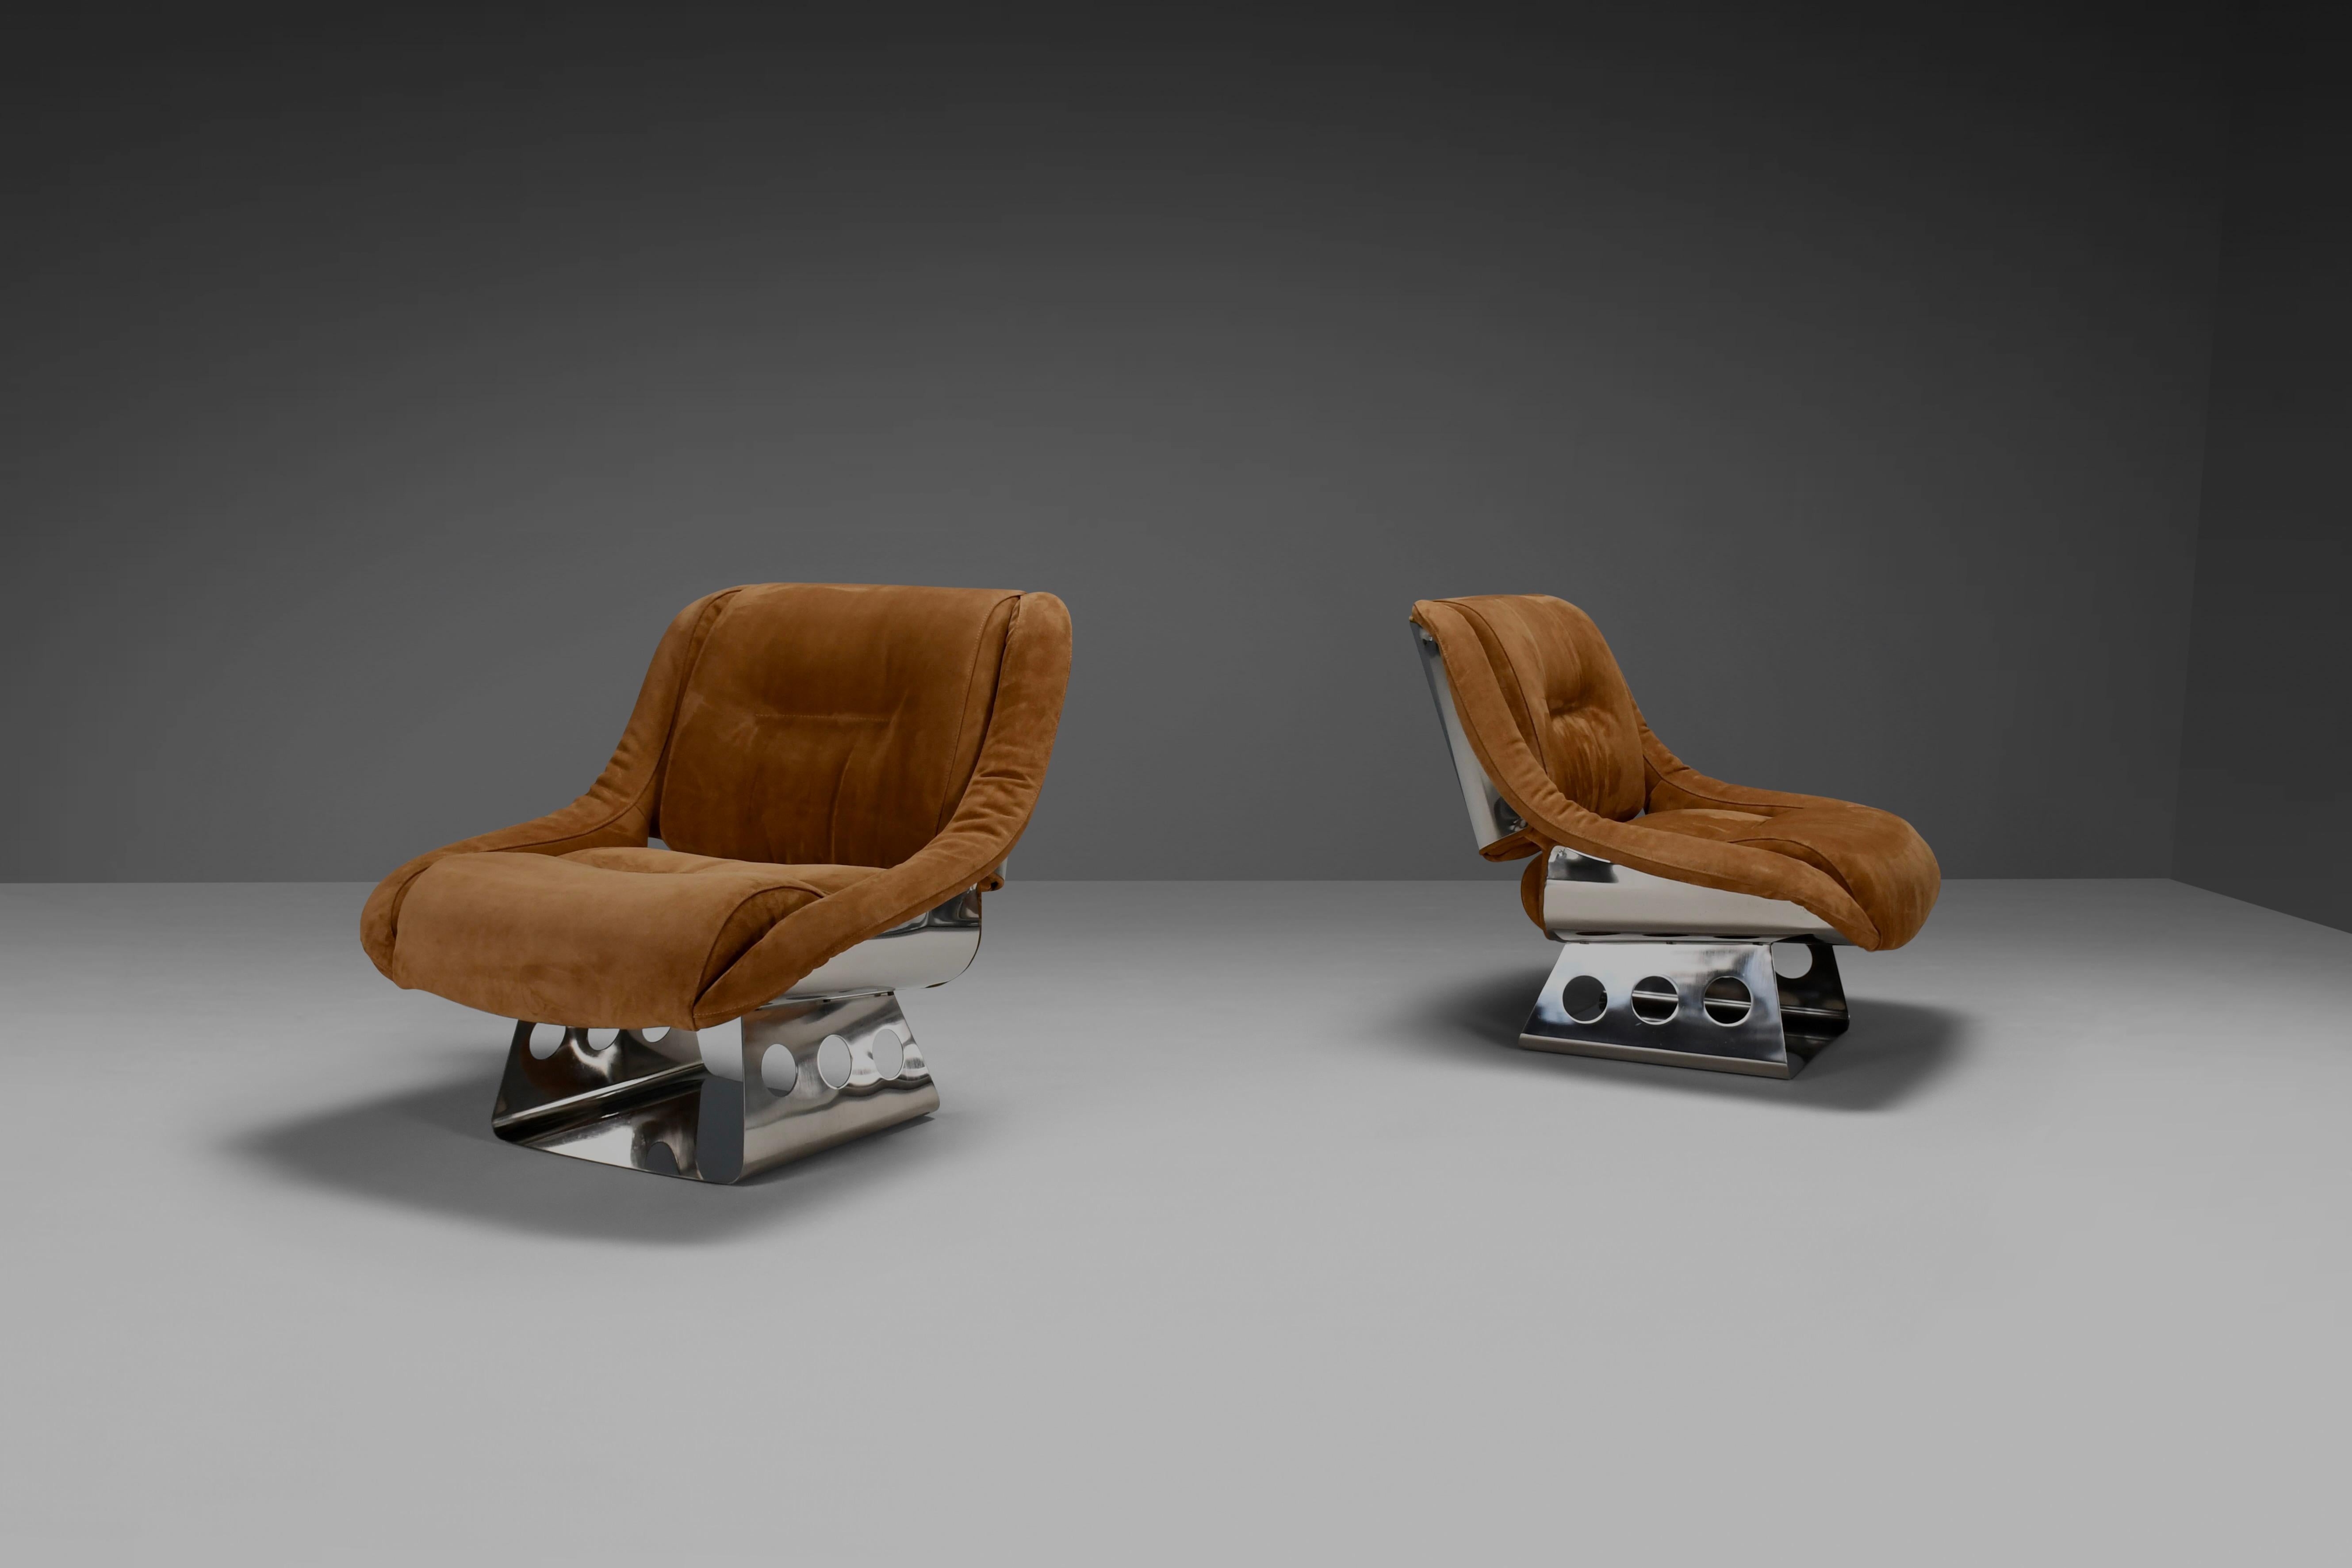 Metal Rare Suede and Stainless Steel Lounge Chairs by Rima Padova, 1974